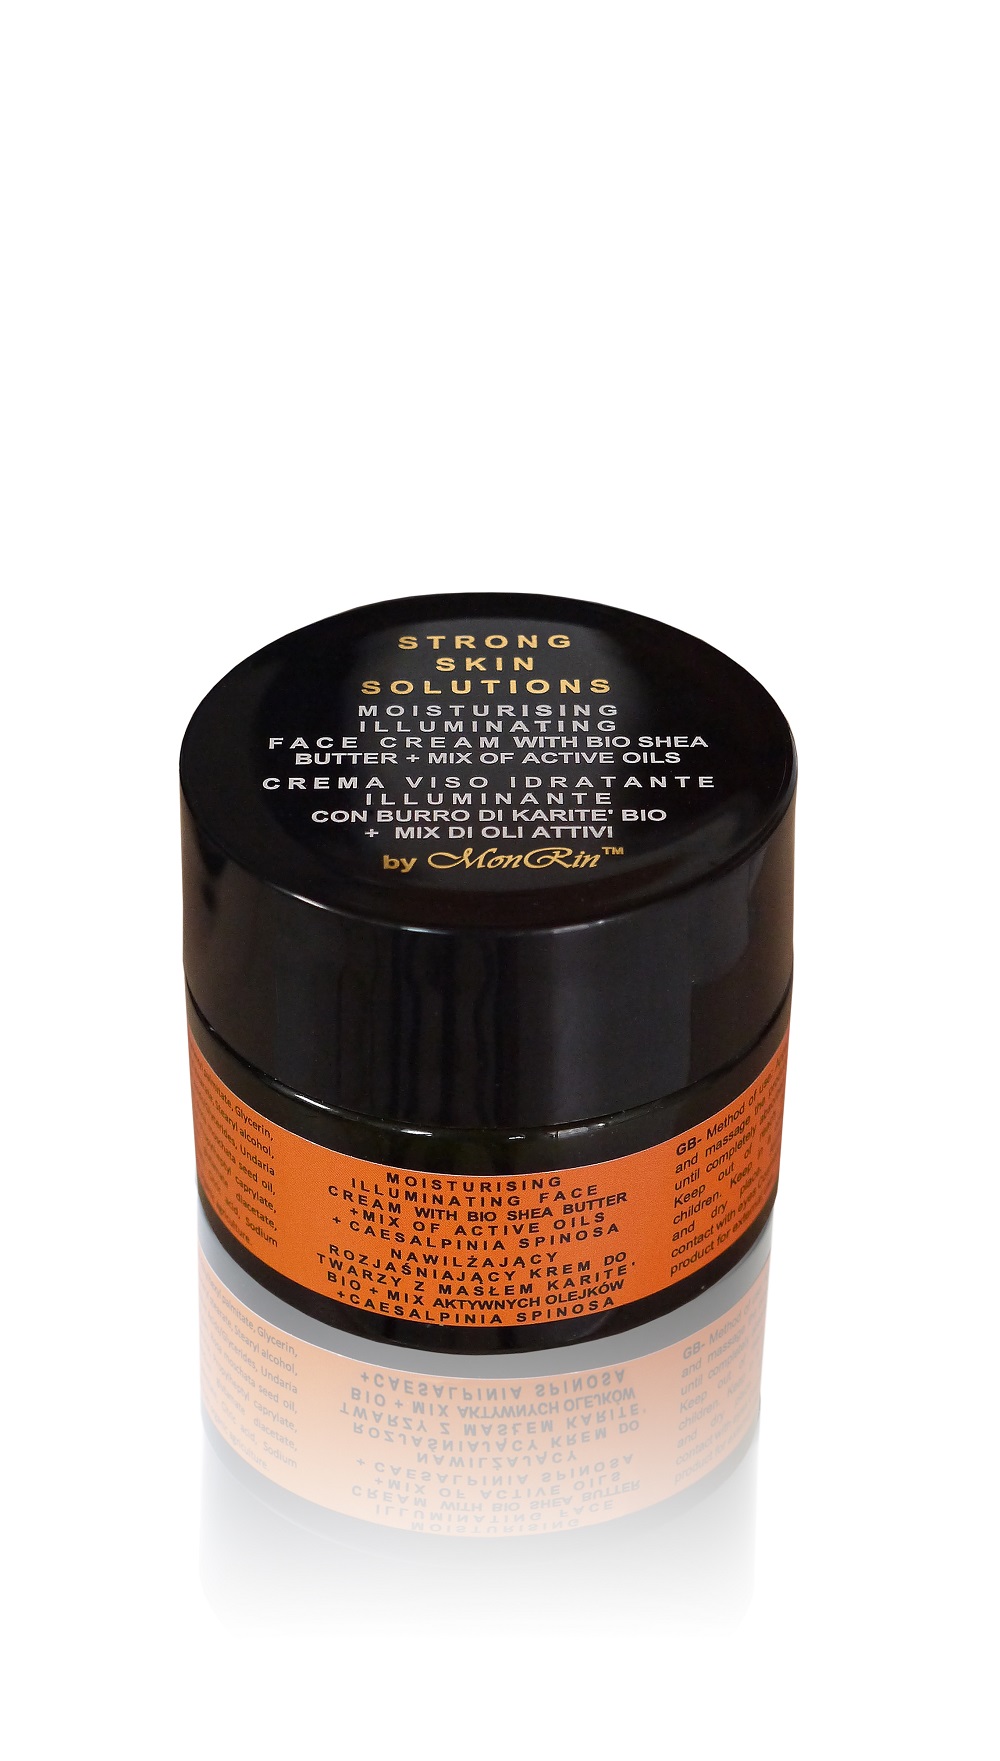 STRONG SKIN SOLUTIONS BY MONRIN MOISTURISING ILLUMINATING FACE CREAM WITH BIO SHEA BUTTER + MIX OF ACTIVE OILS